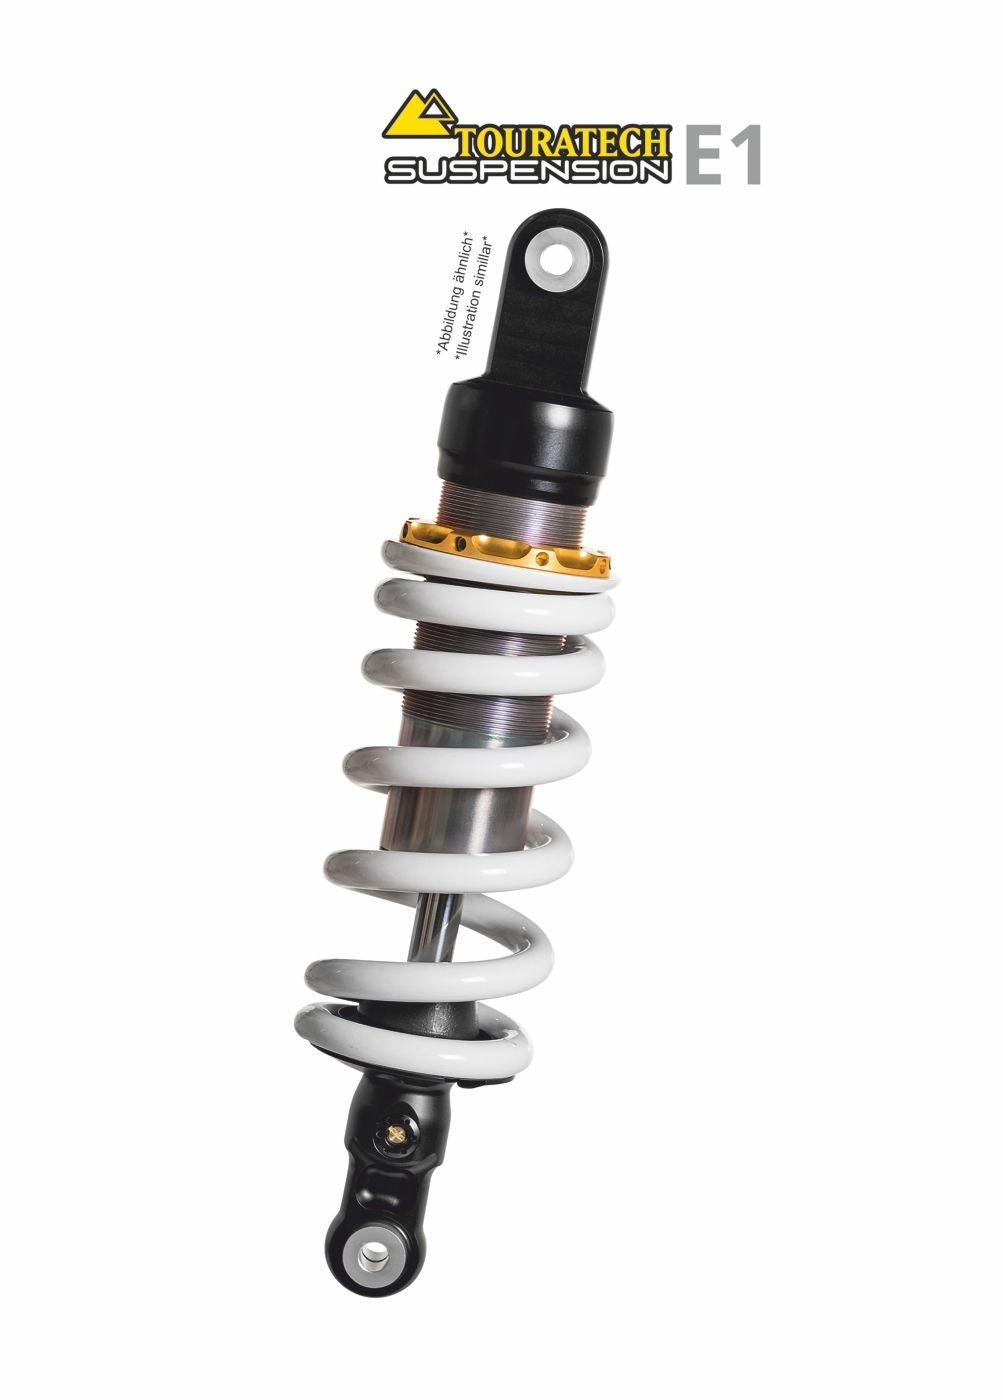 Touratech Suspension E1 shock absorber for BMW R 1100 RS Rear 1993 - 2001